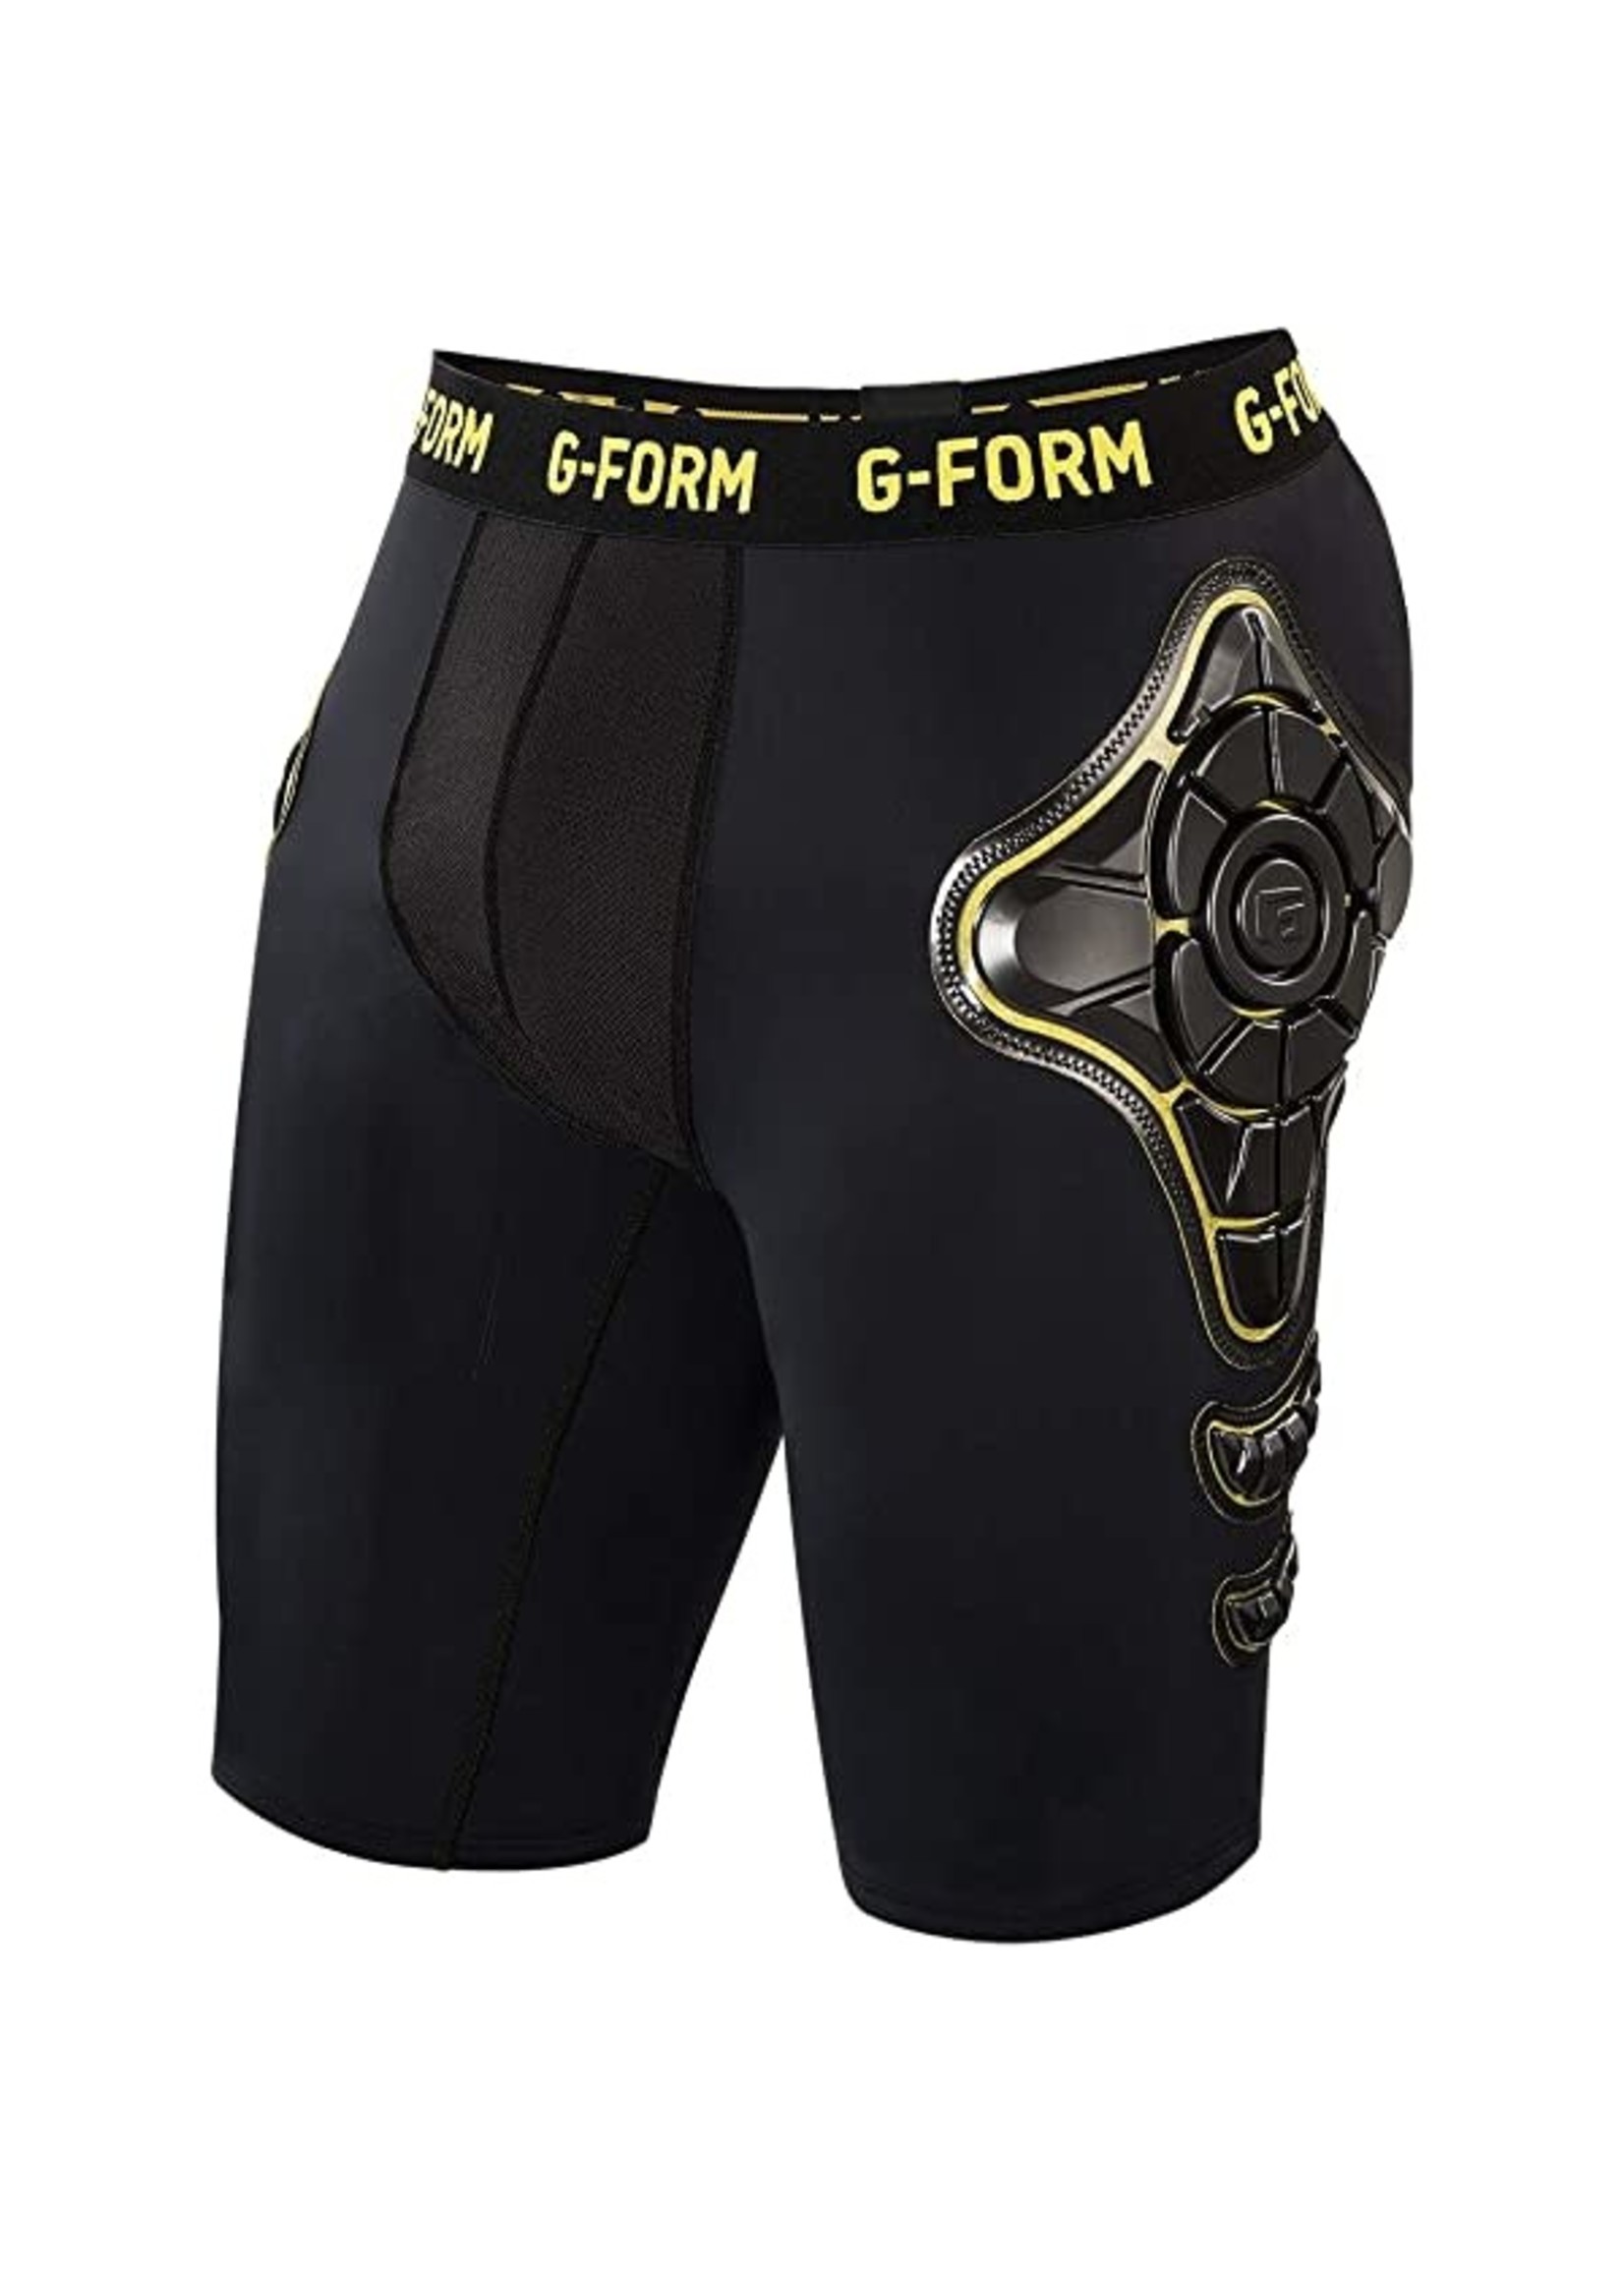 Tangent Protection G-Form Short